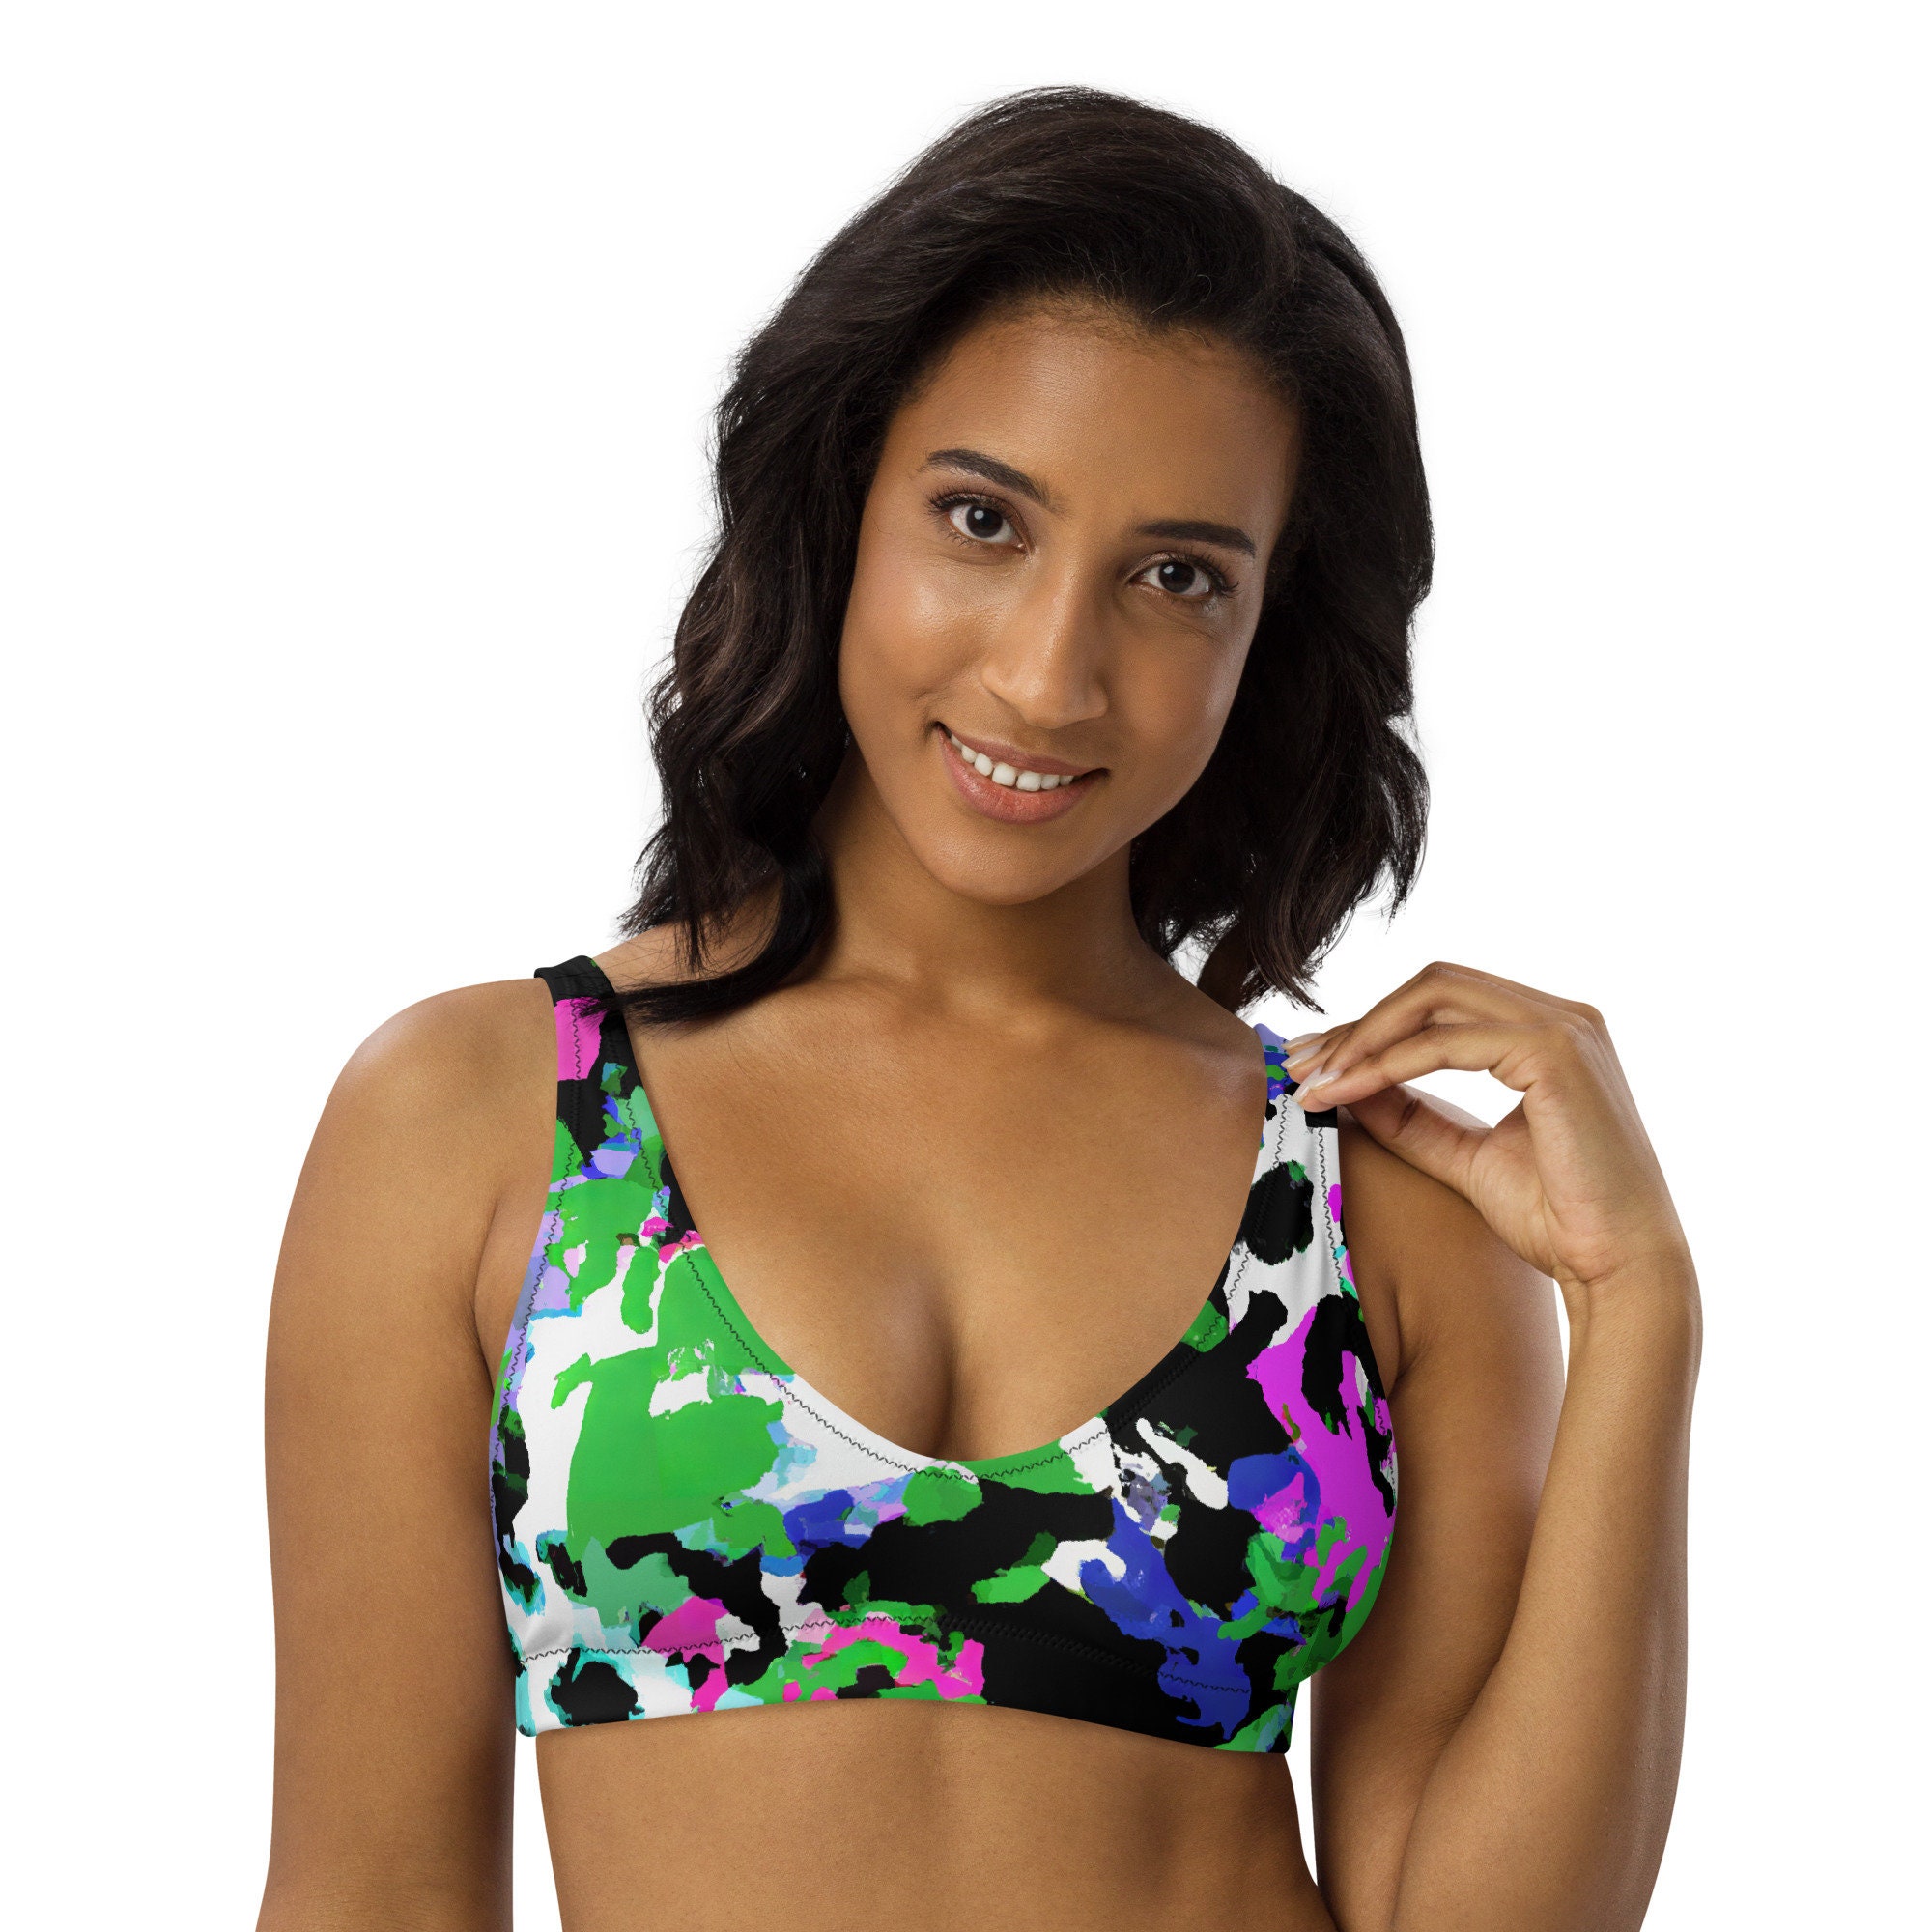 Buy Couples Matching Bra Online In India -  India